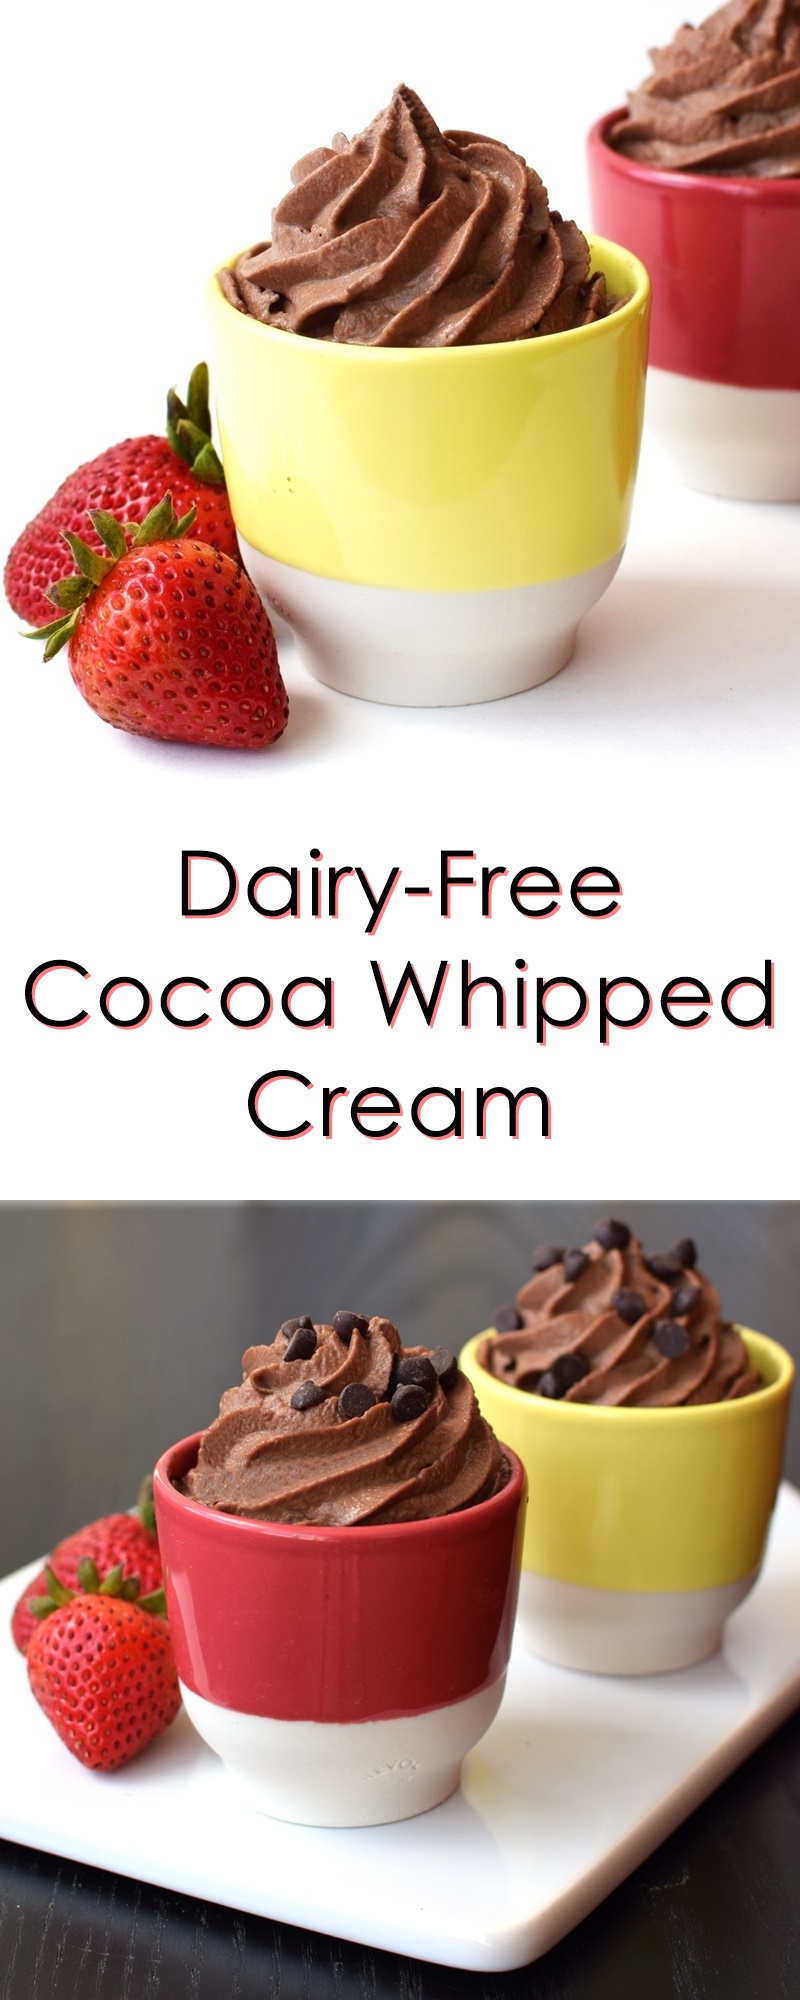 Dairy-Free Chocolate Whipped Cream Recipe - vegan, soy-free and easy!